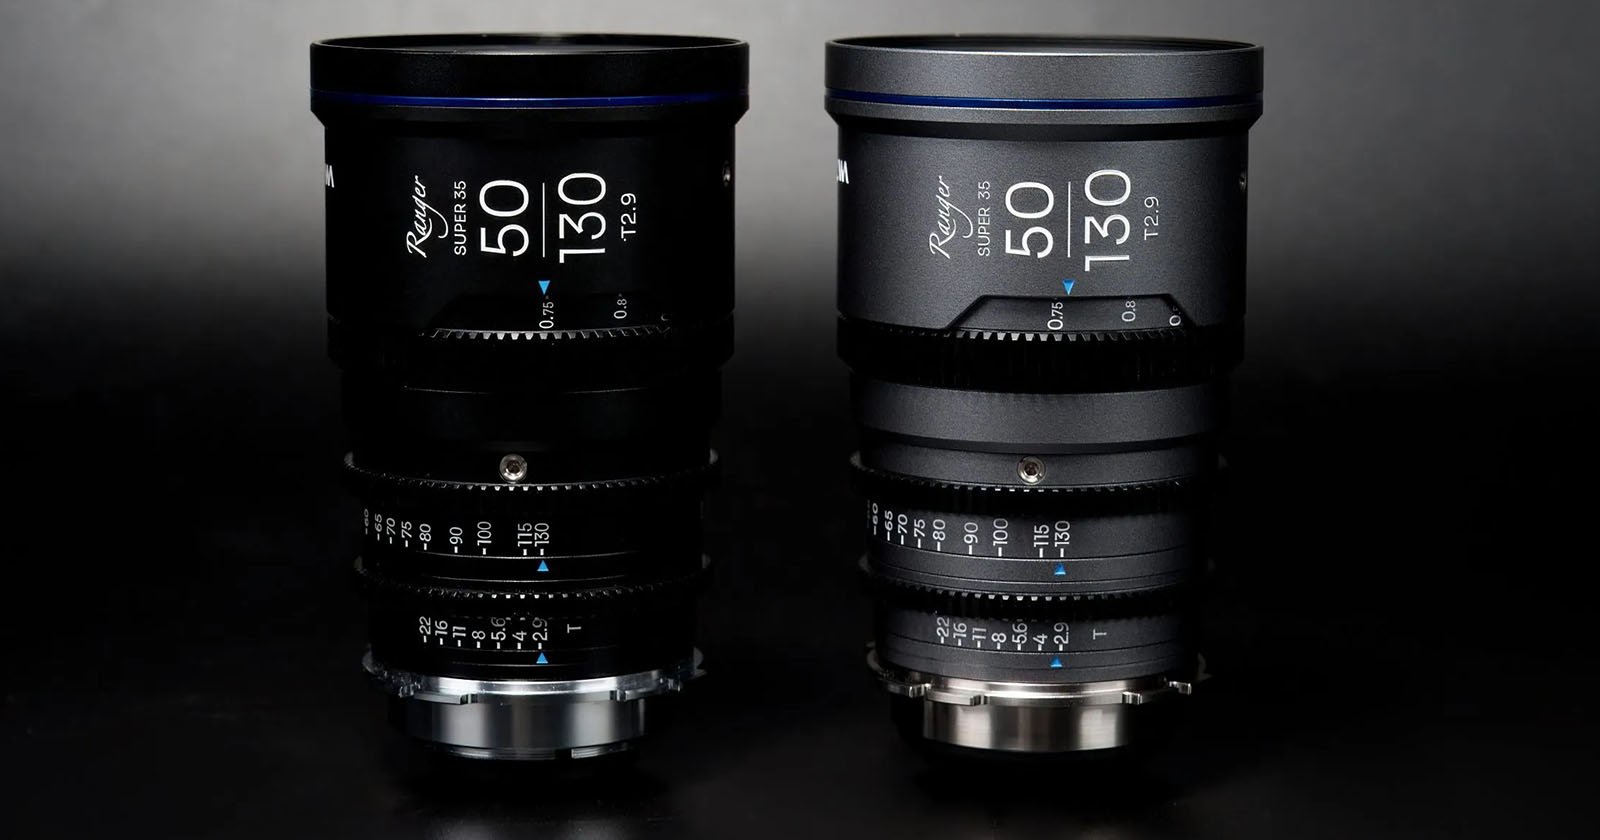 Two professional camera lenses, one marked 150mm and the other 50mm, stand vertically on a glossy surface against a dark background.